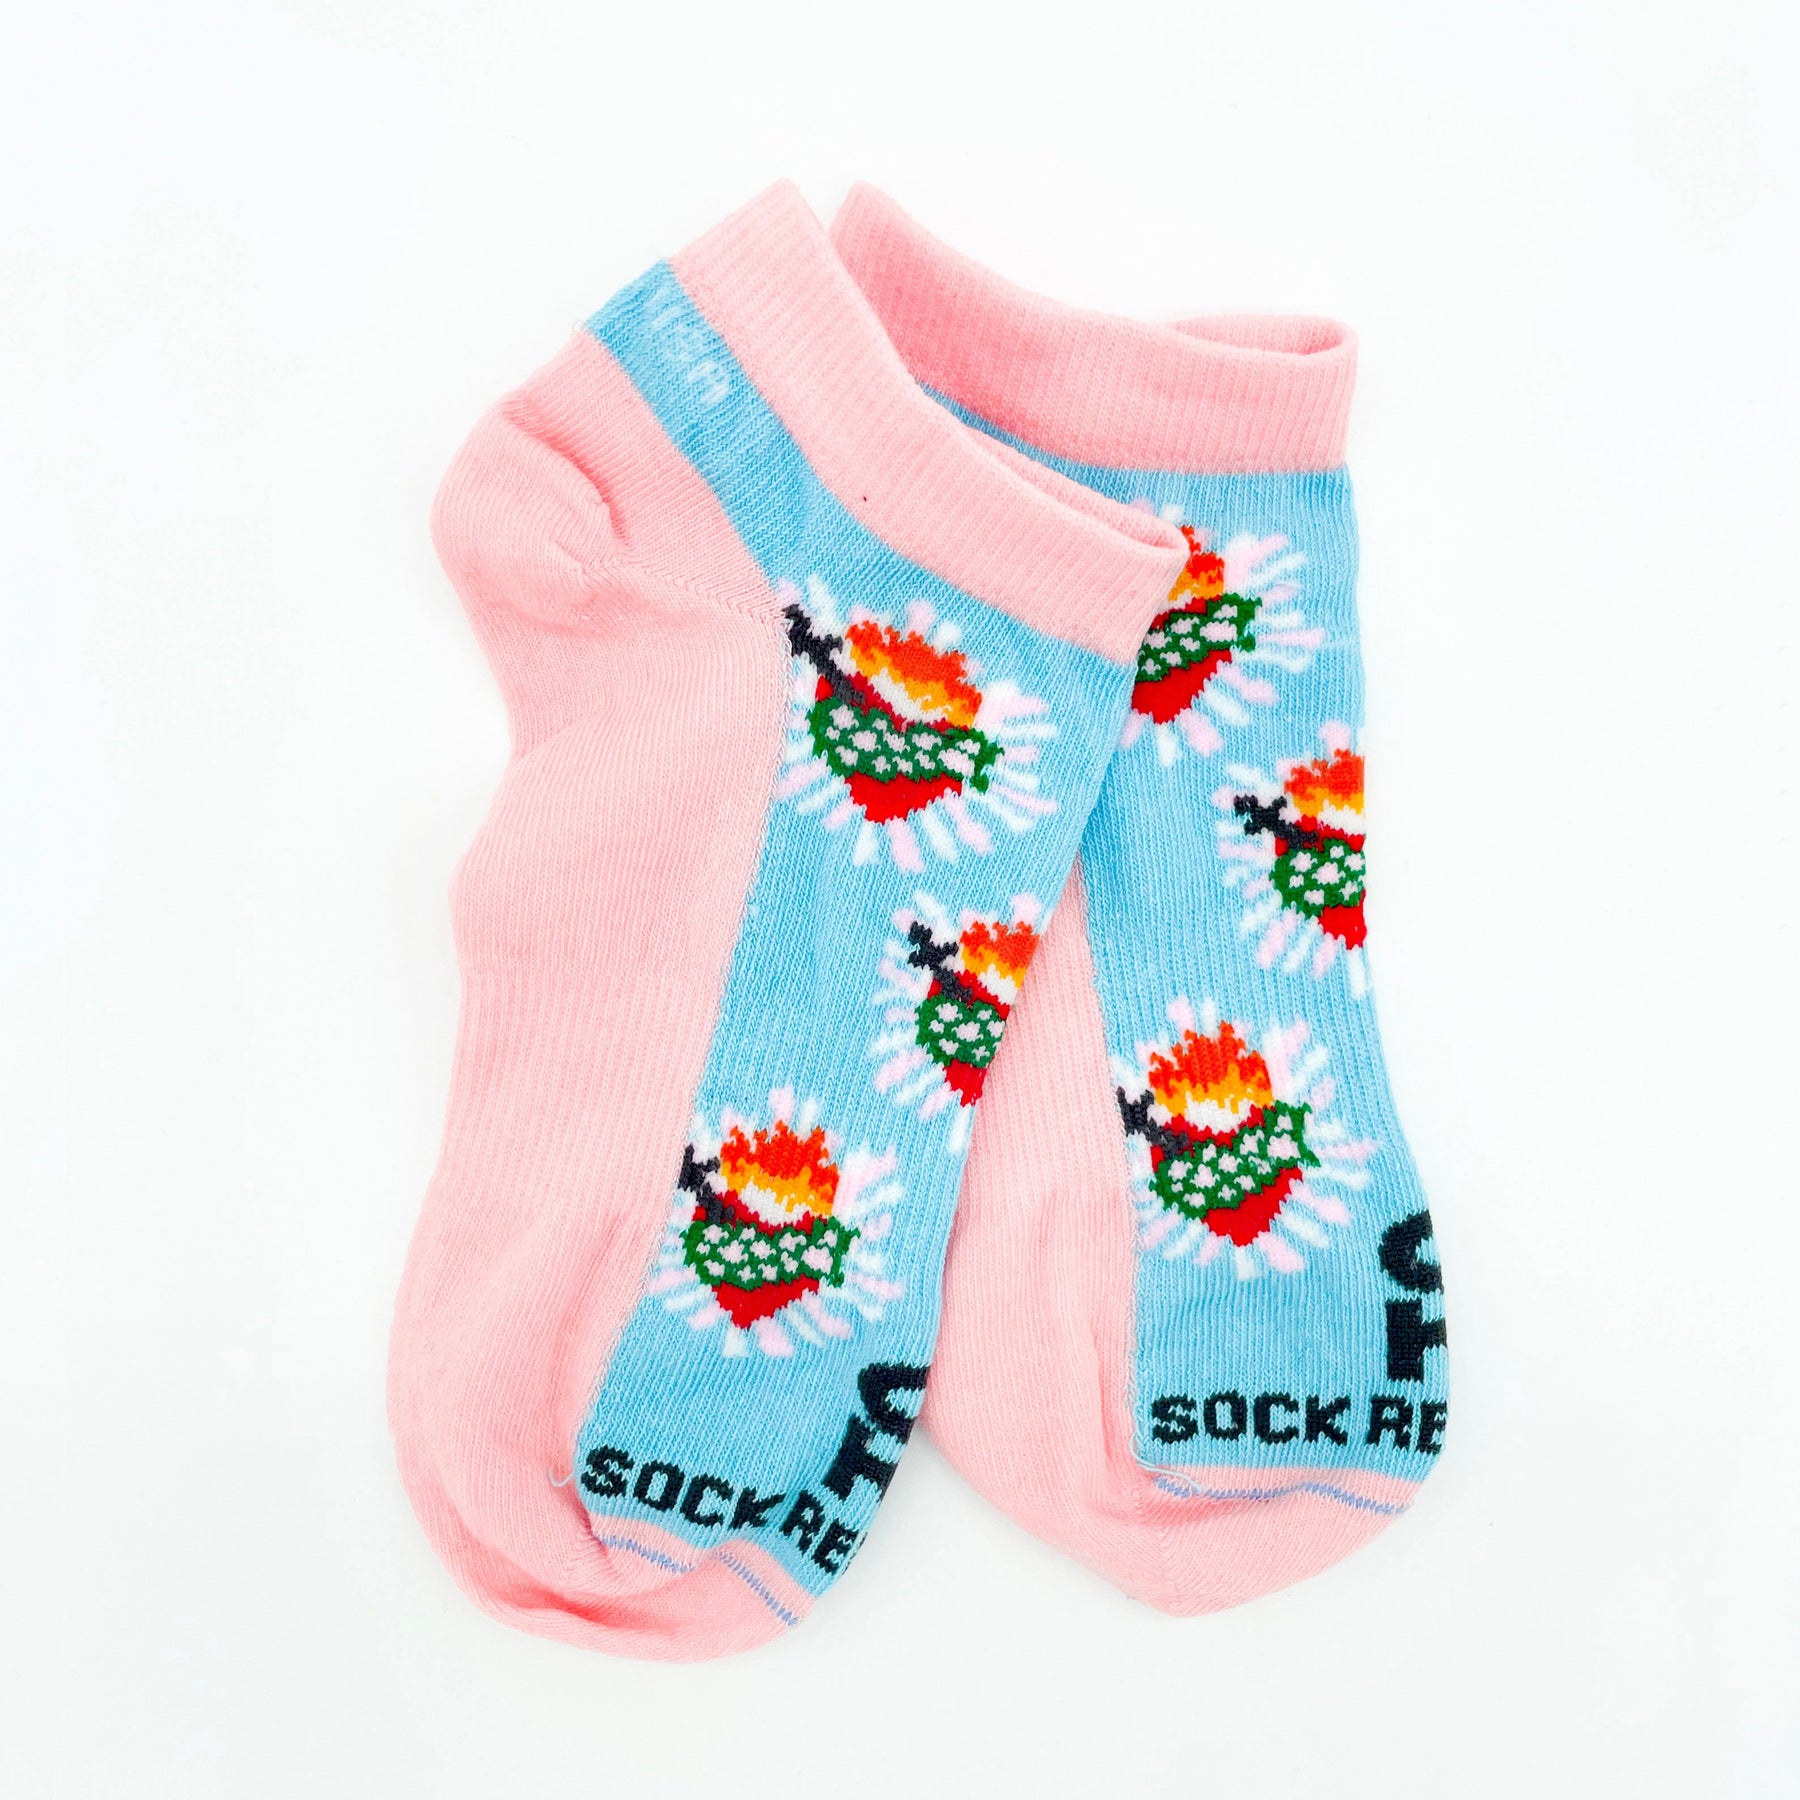 12 Month Pre-paid Sock Subscription